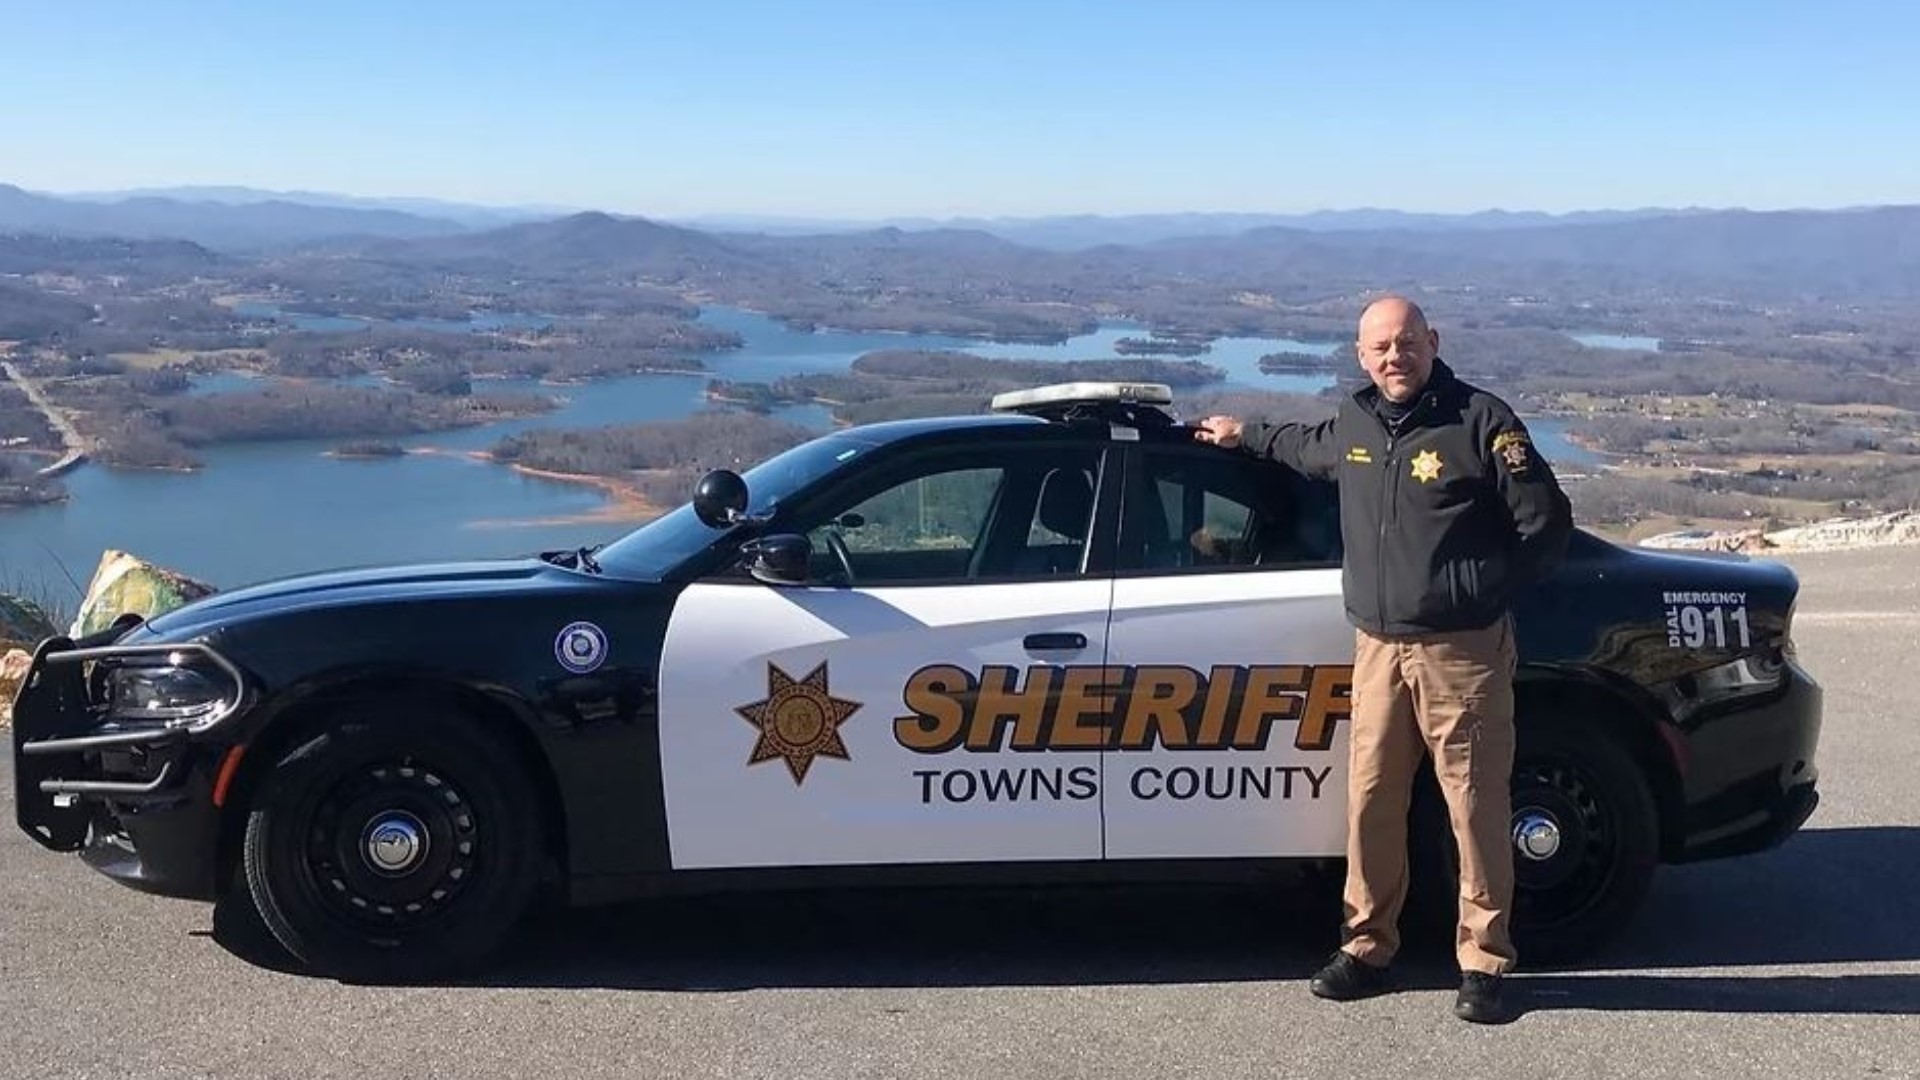 11Alive Investigates obtained new video of the Towns County Sheriff arguing with another driver and uncovered accusations against him from a former employee.